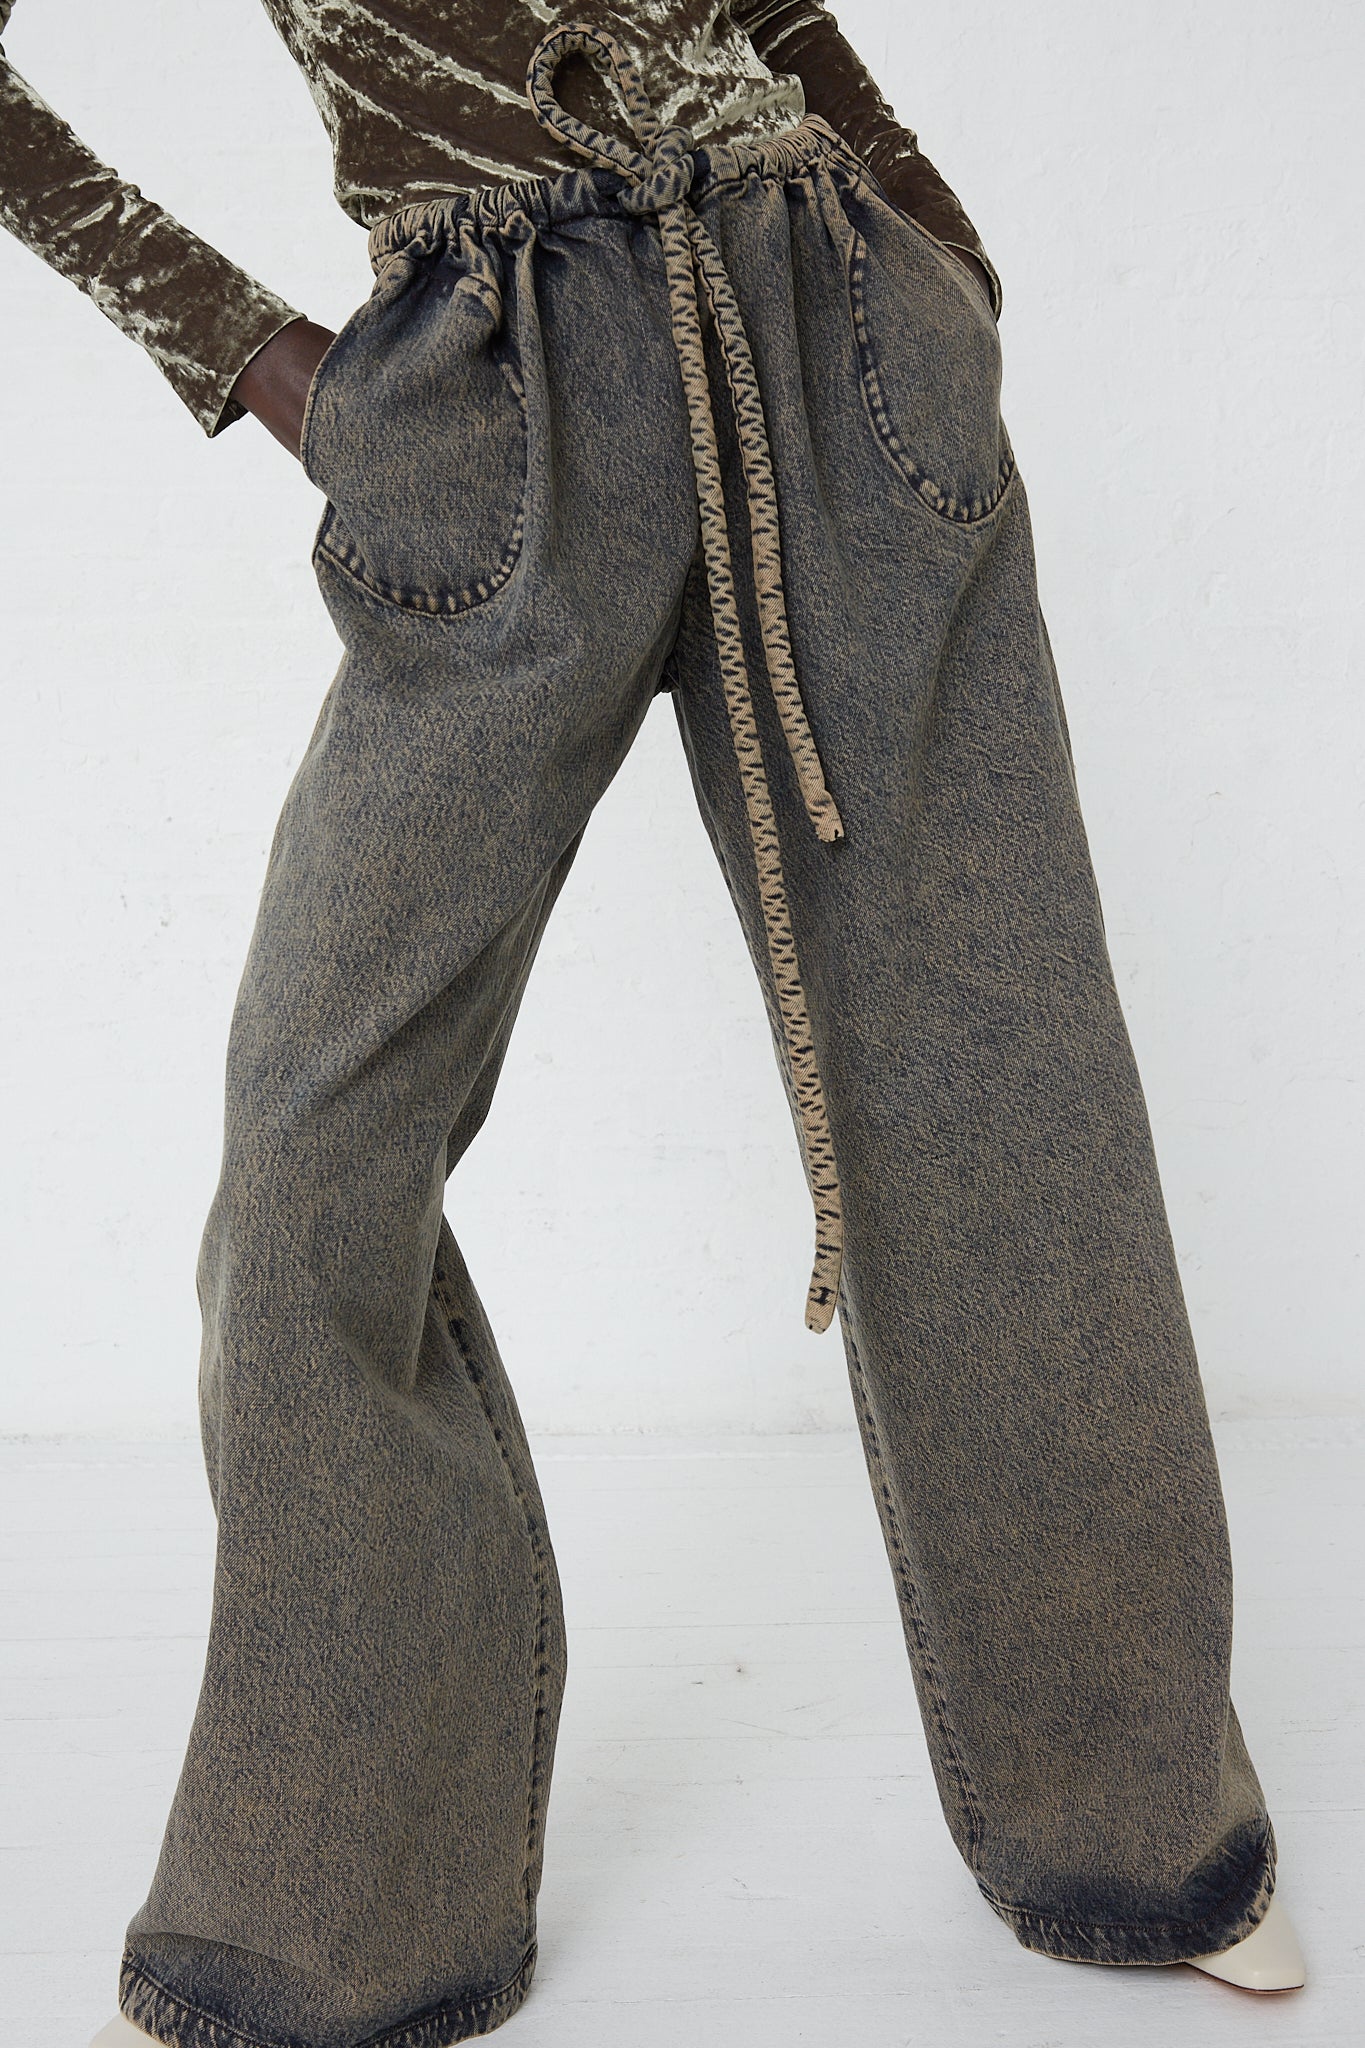 A woman wearing Veronique Leroy Denim Belted Trousers in Acid Wash Denim, featuring an adjustable drawstring waist.